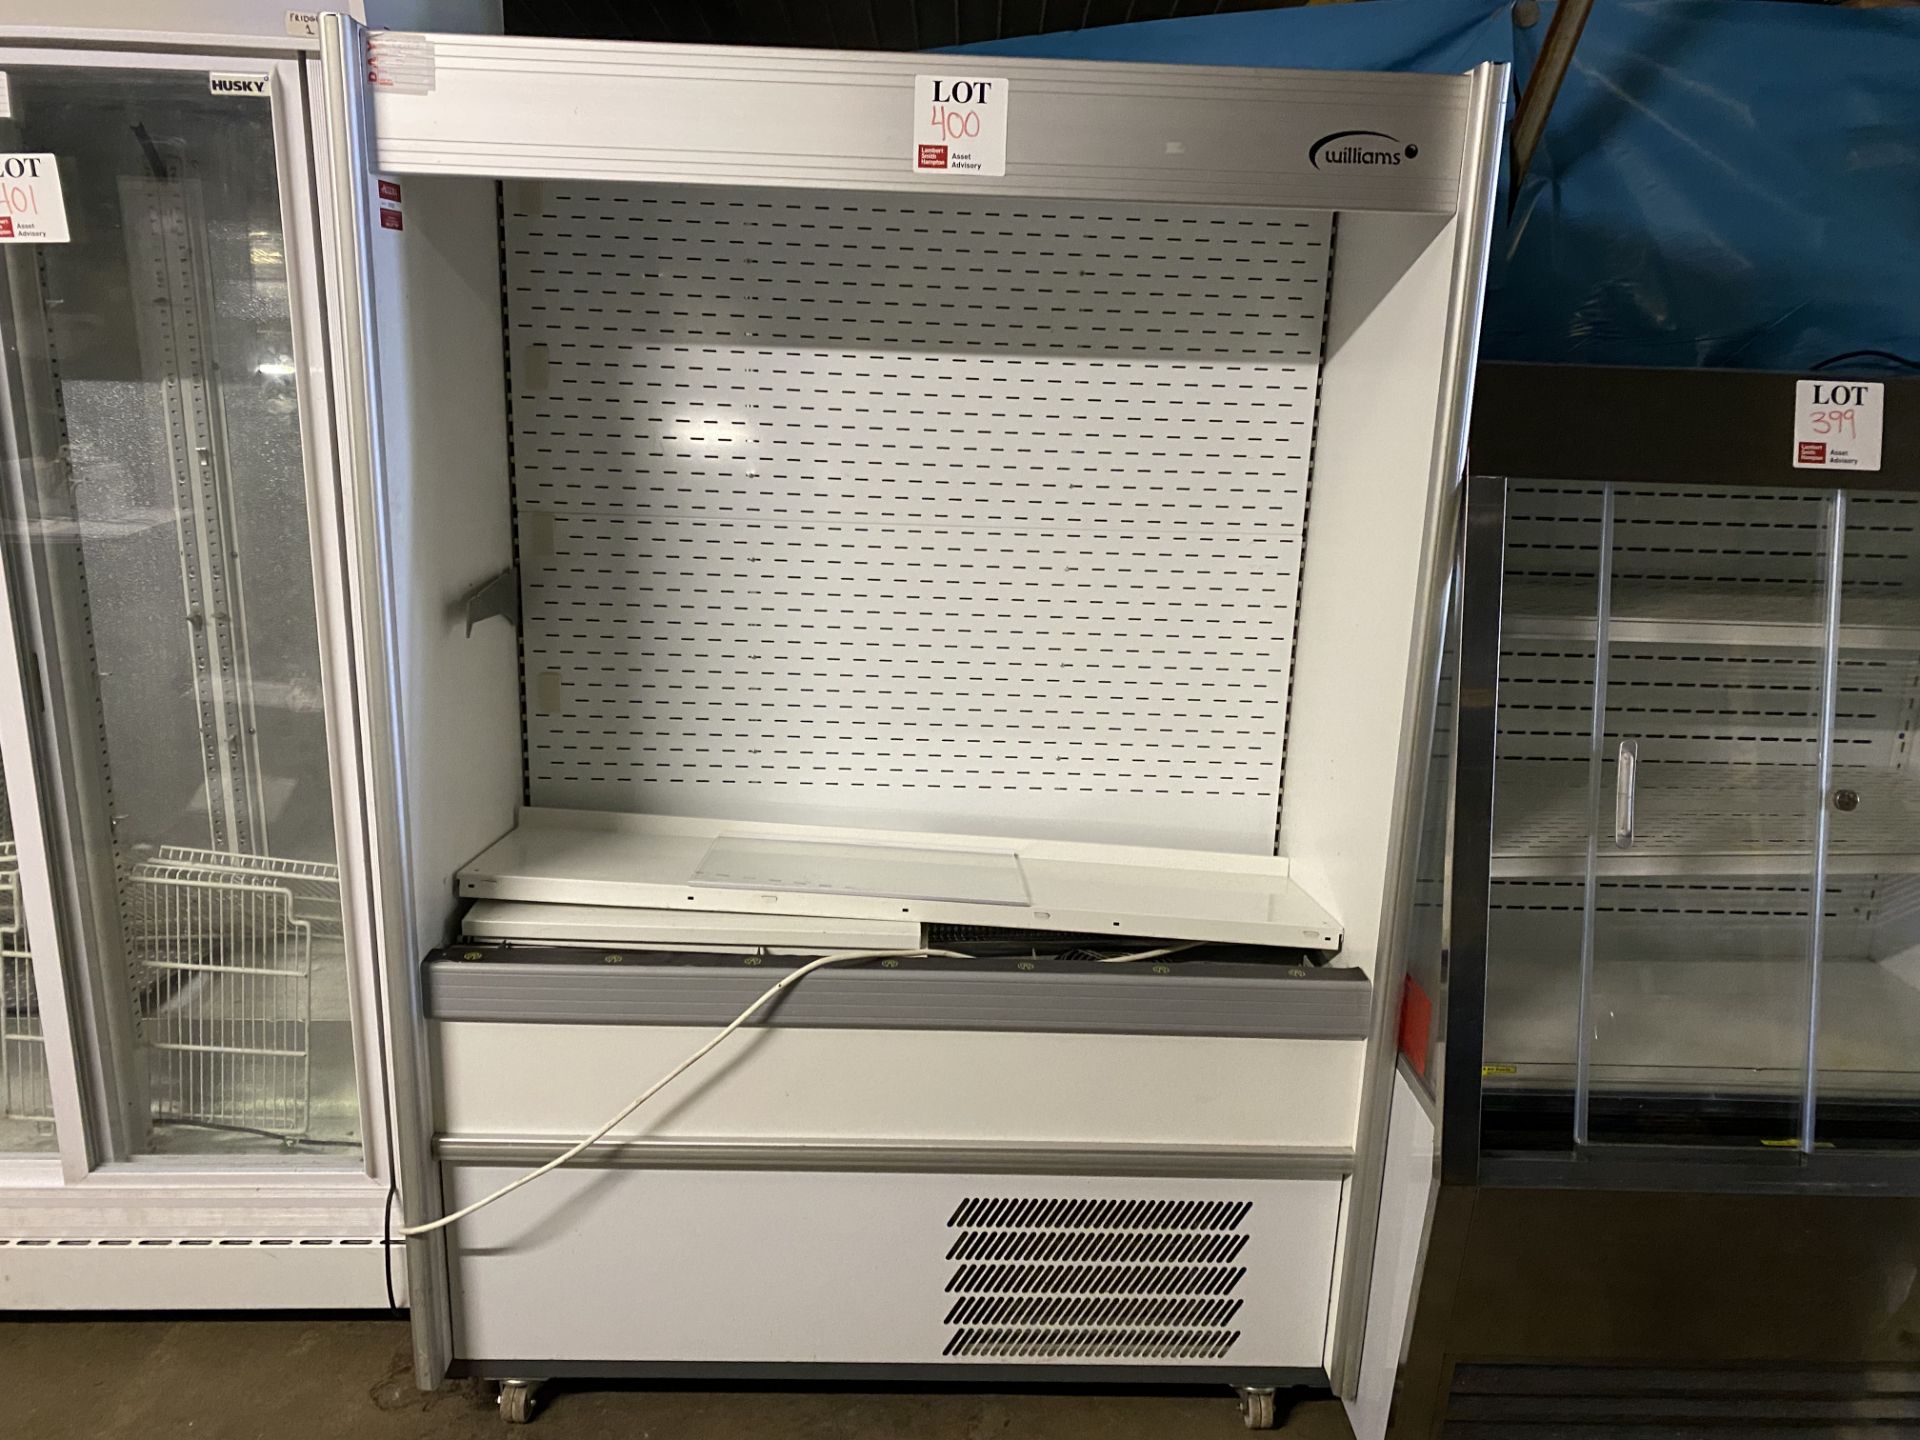 Williams open fronted display fridge, with internal lighting and roller blinds, model C125-WCN (